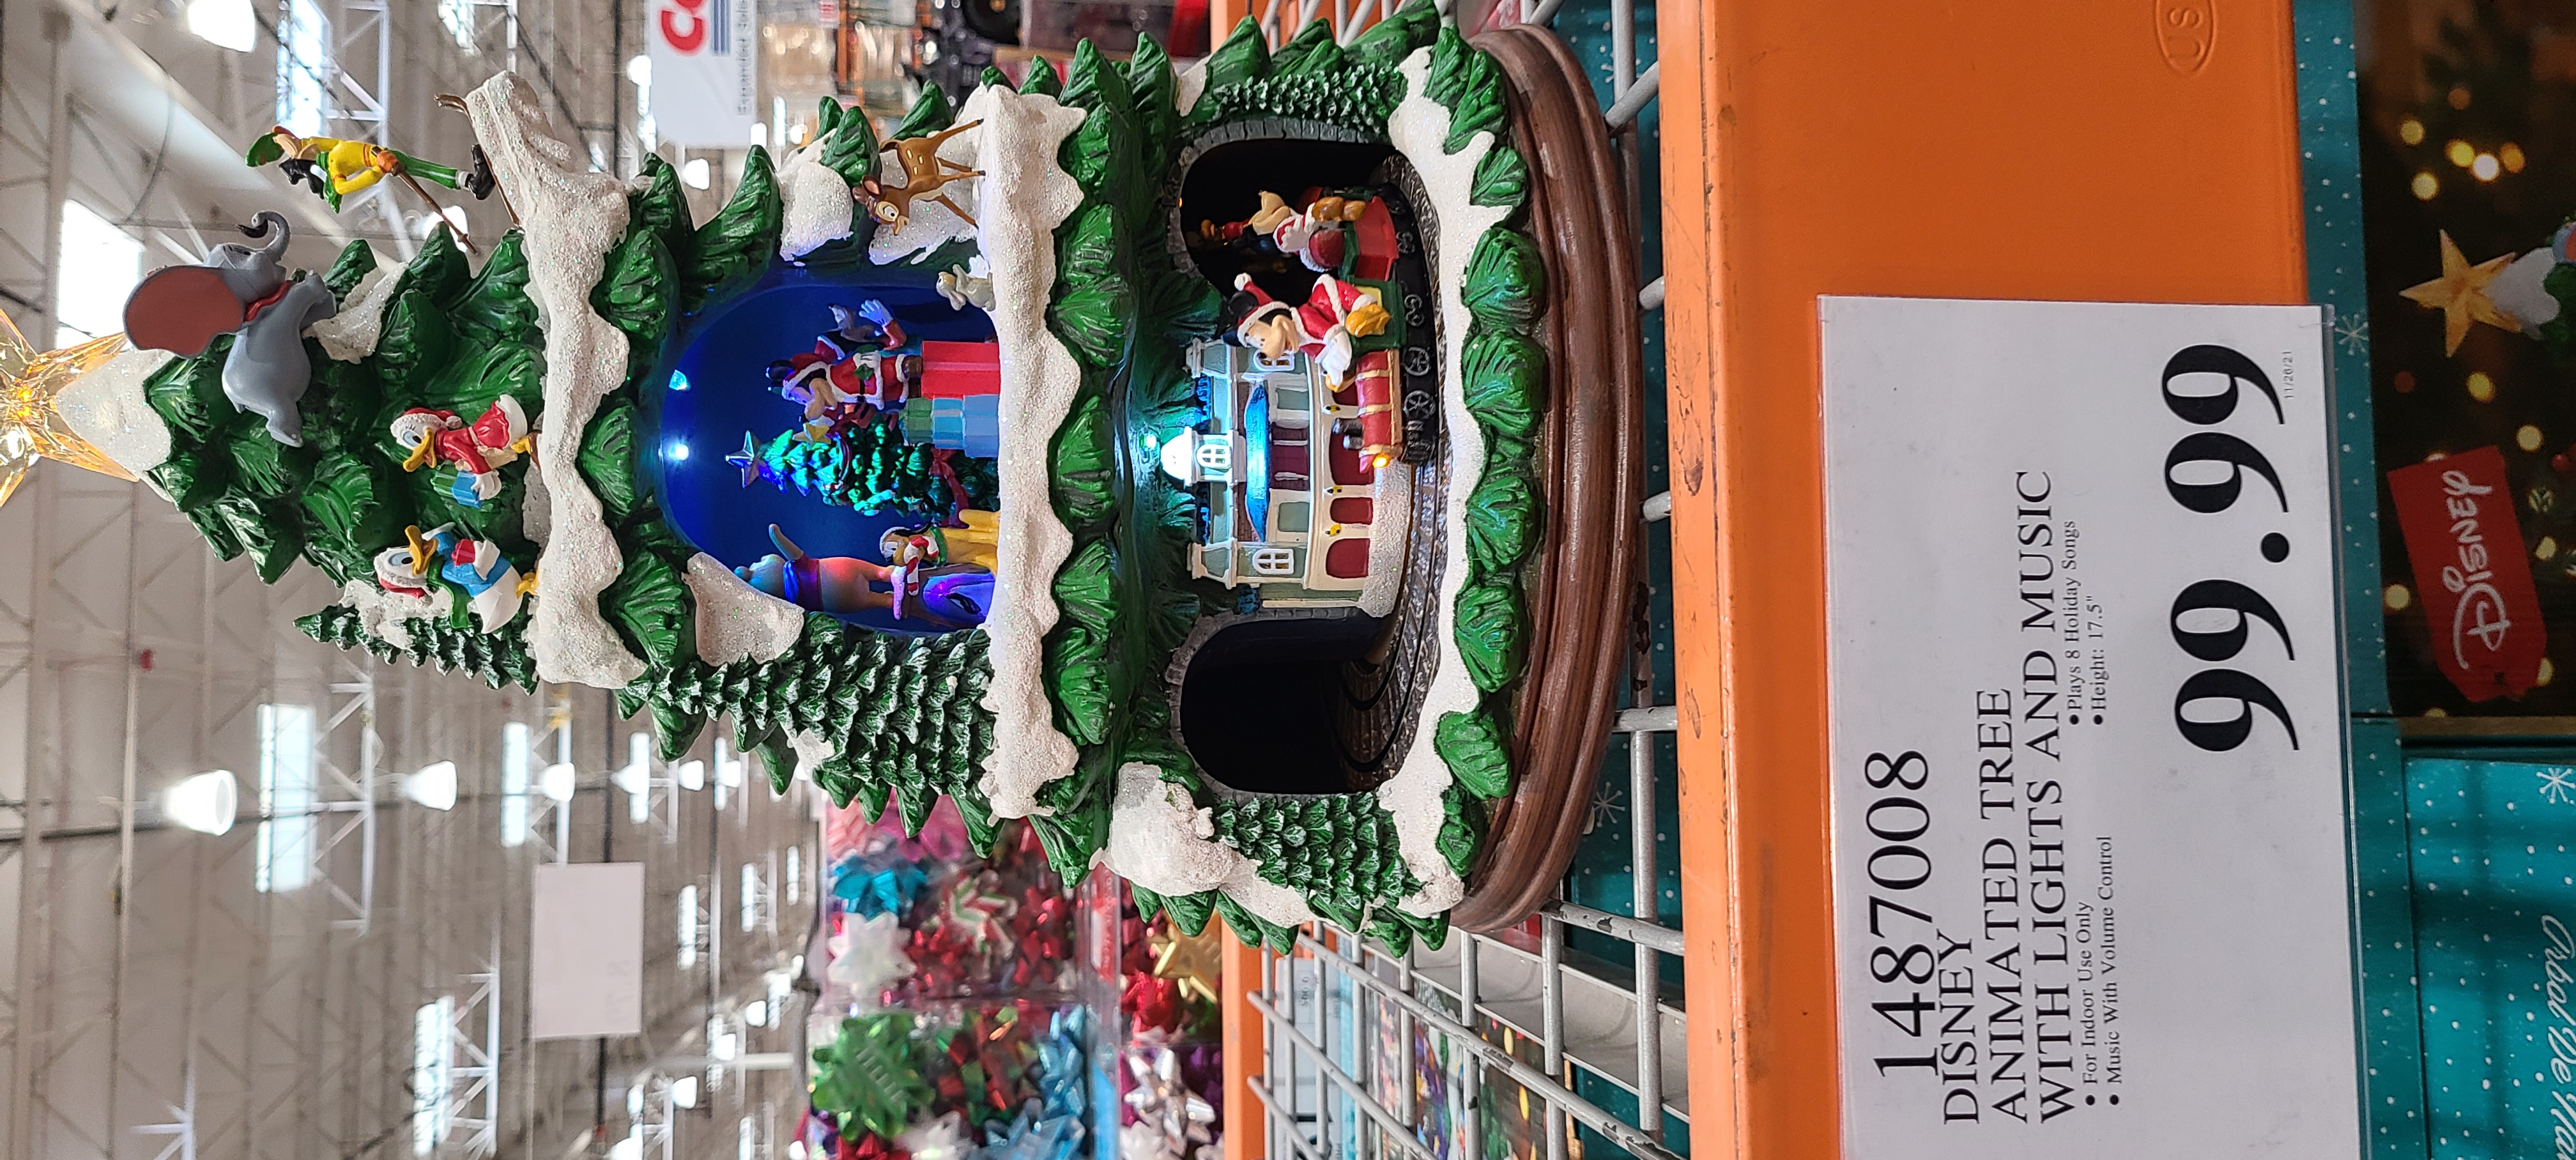 Disney Animated Christmas Tree 17" Inch with 8 Holiday Songs - Costco IN STORE - $99